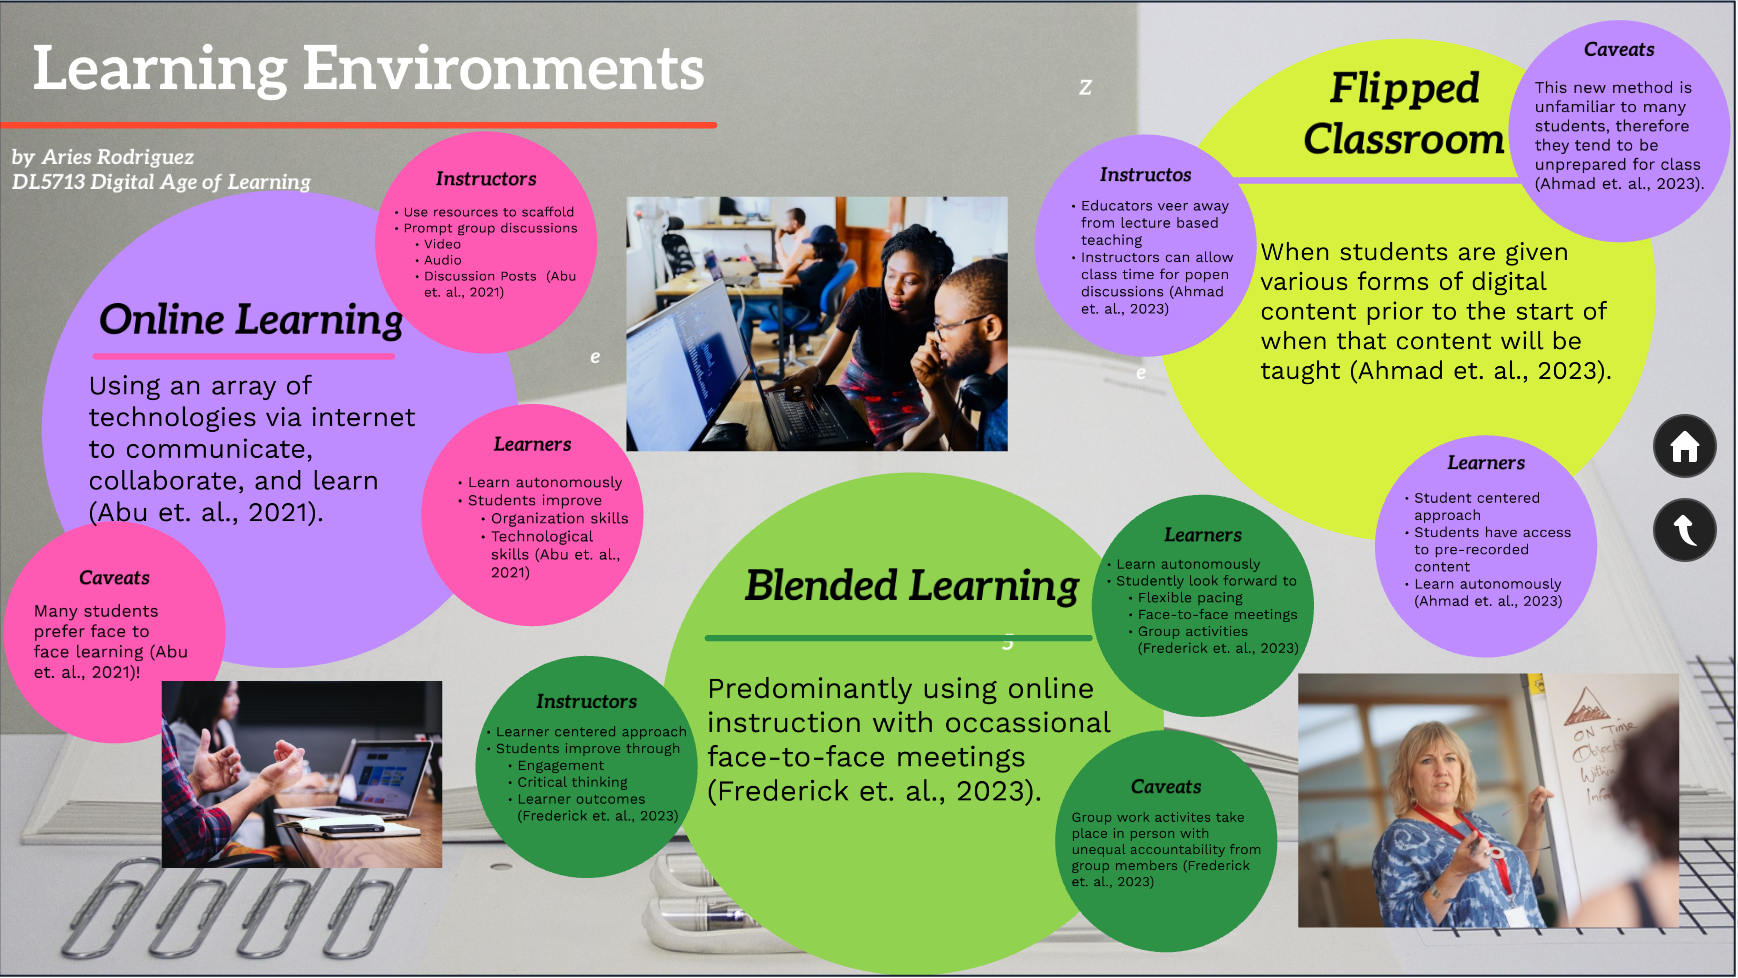 Different learning environments